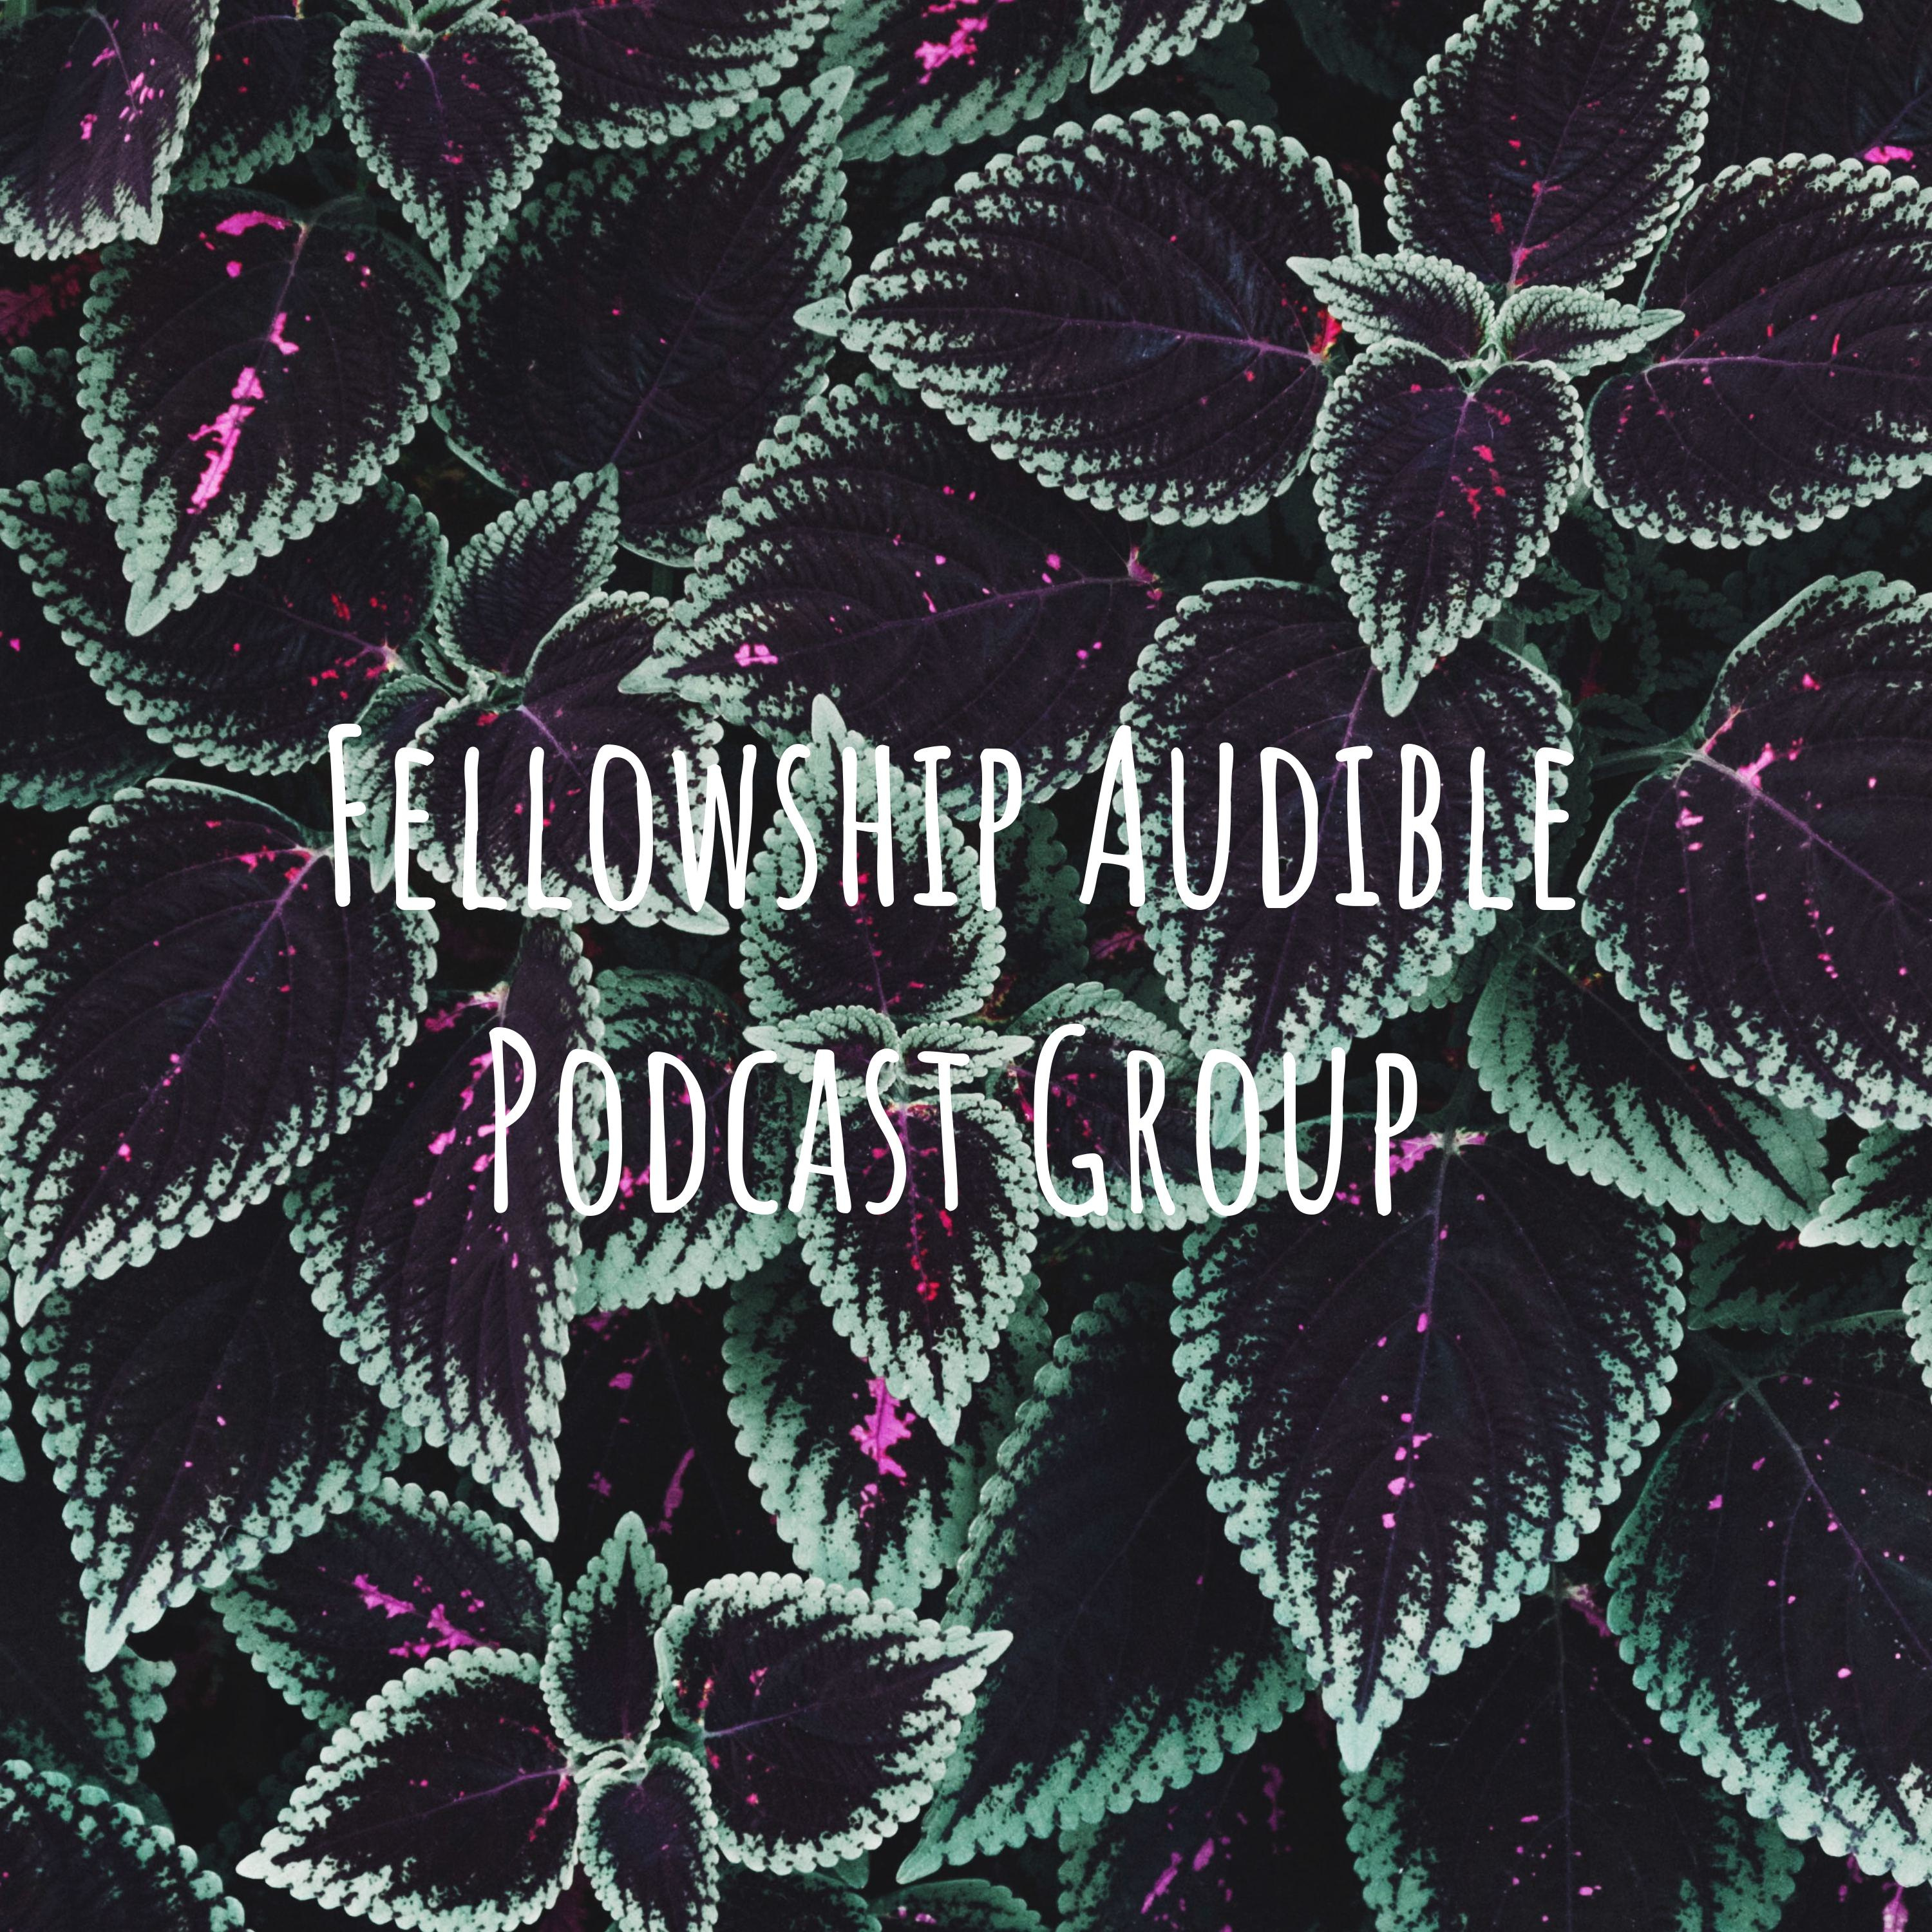 Fellowship Audio Podcast 20AUG19 | Fished over news